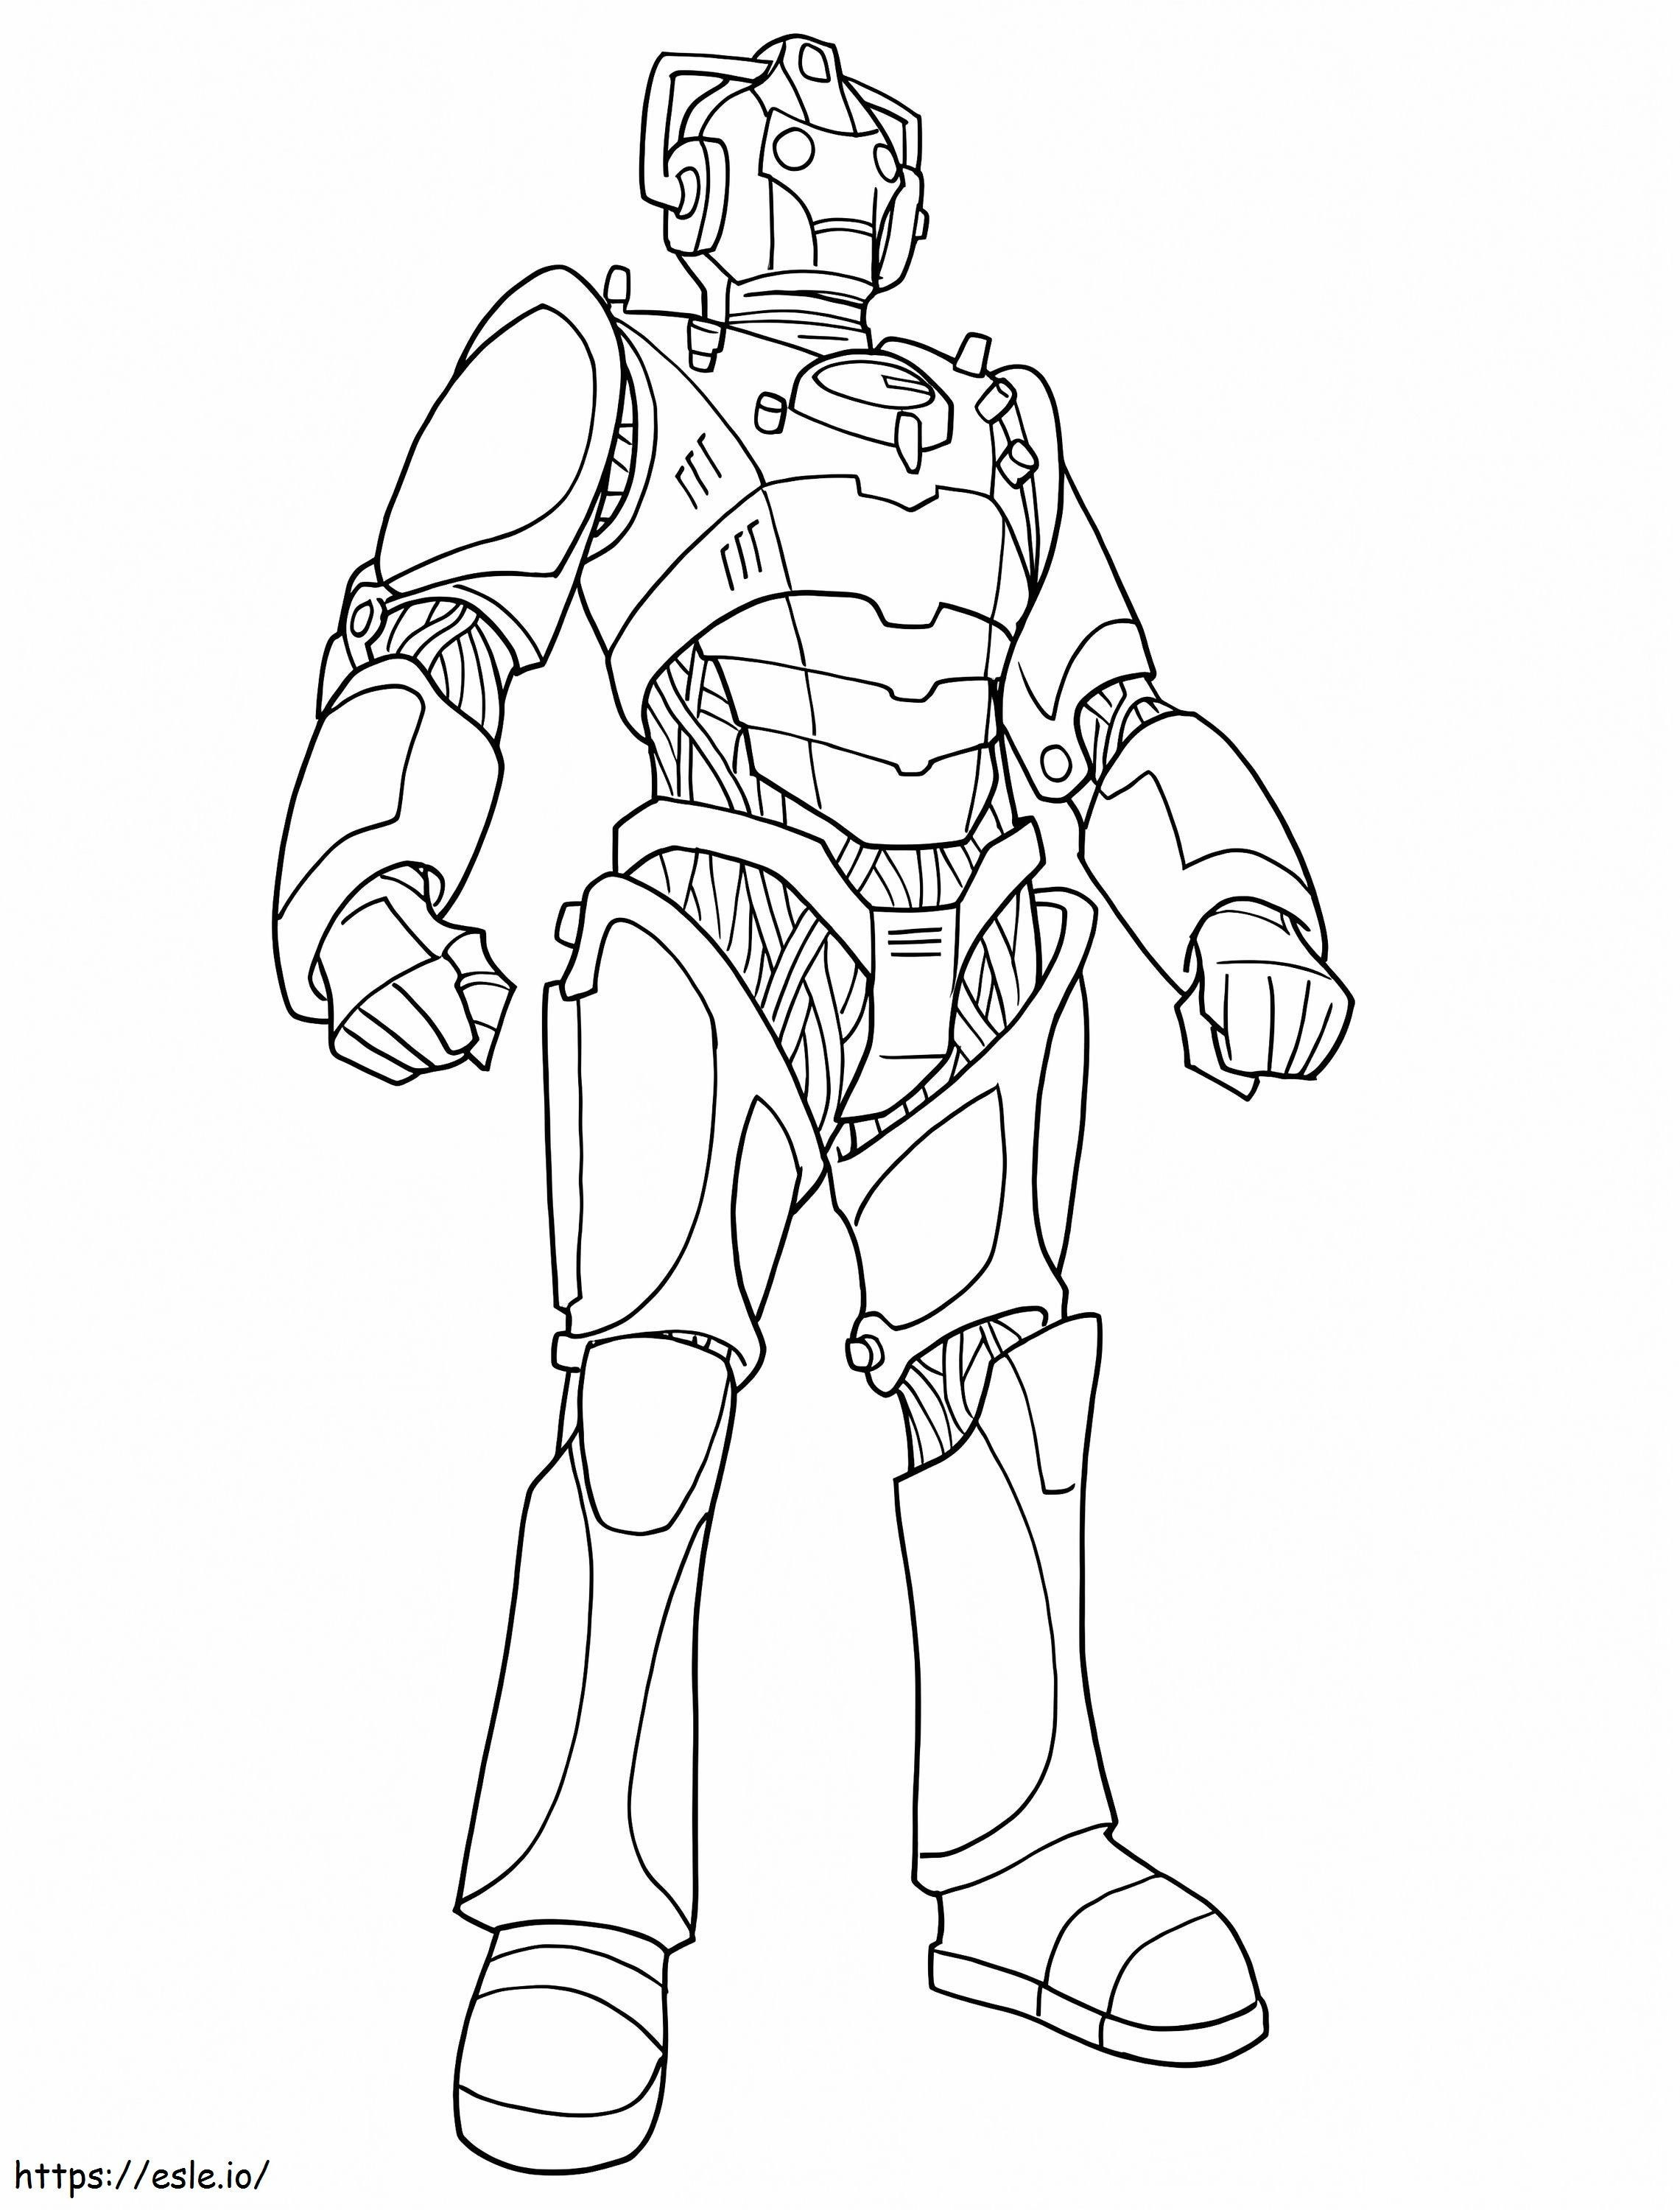 Cybermen From Doctor Who coloring page